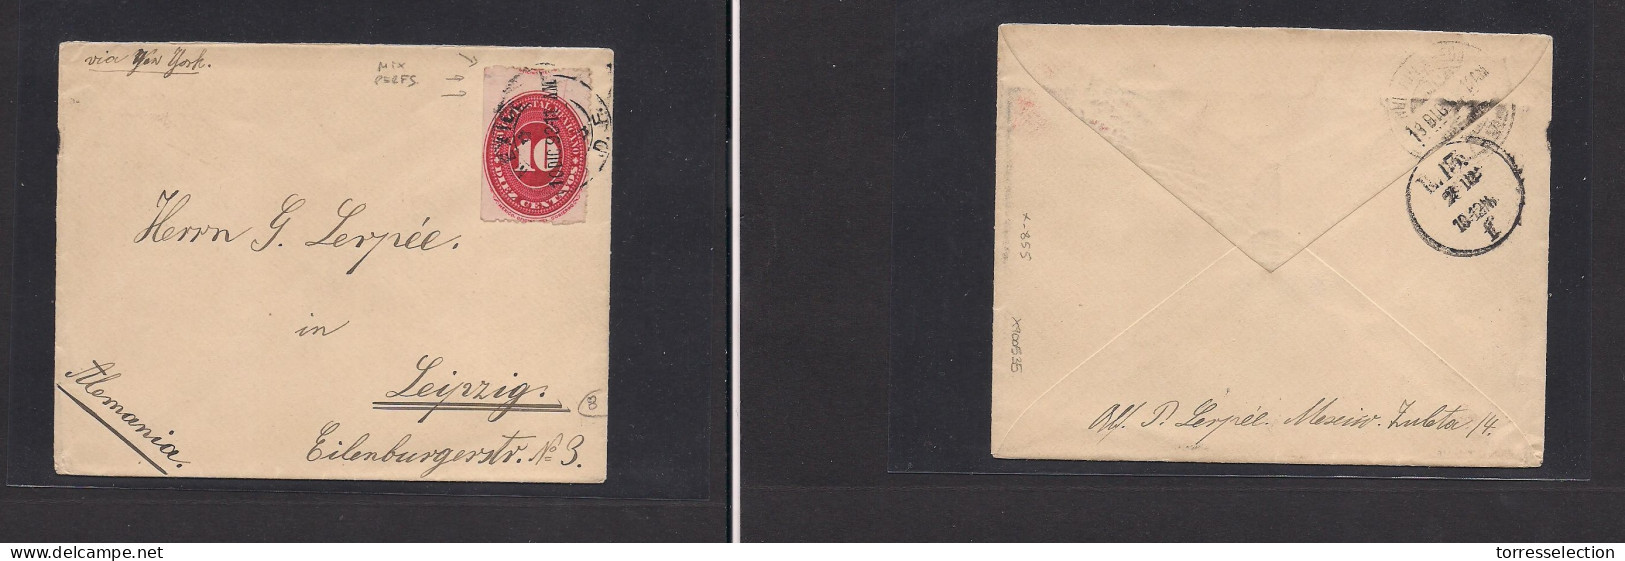 MEXICO. Mexico - Cover - 1893 DF To Lepizig  Germany Frkd Env Lare Numeral Prforation Varietty, Interesting And Rare. Ea - Mexiko